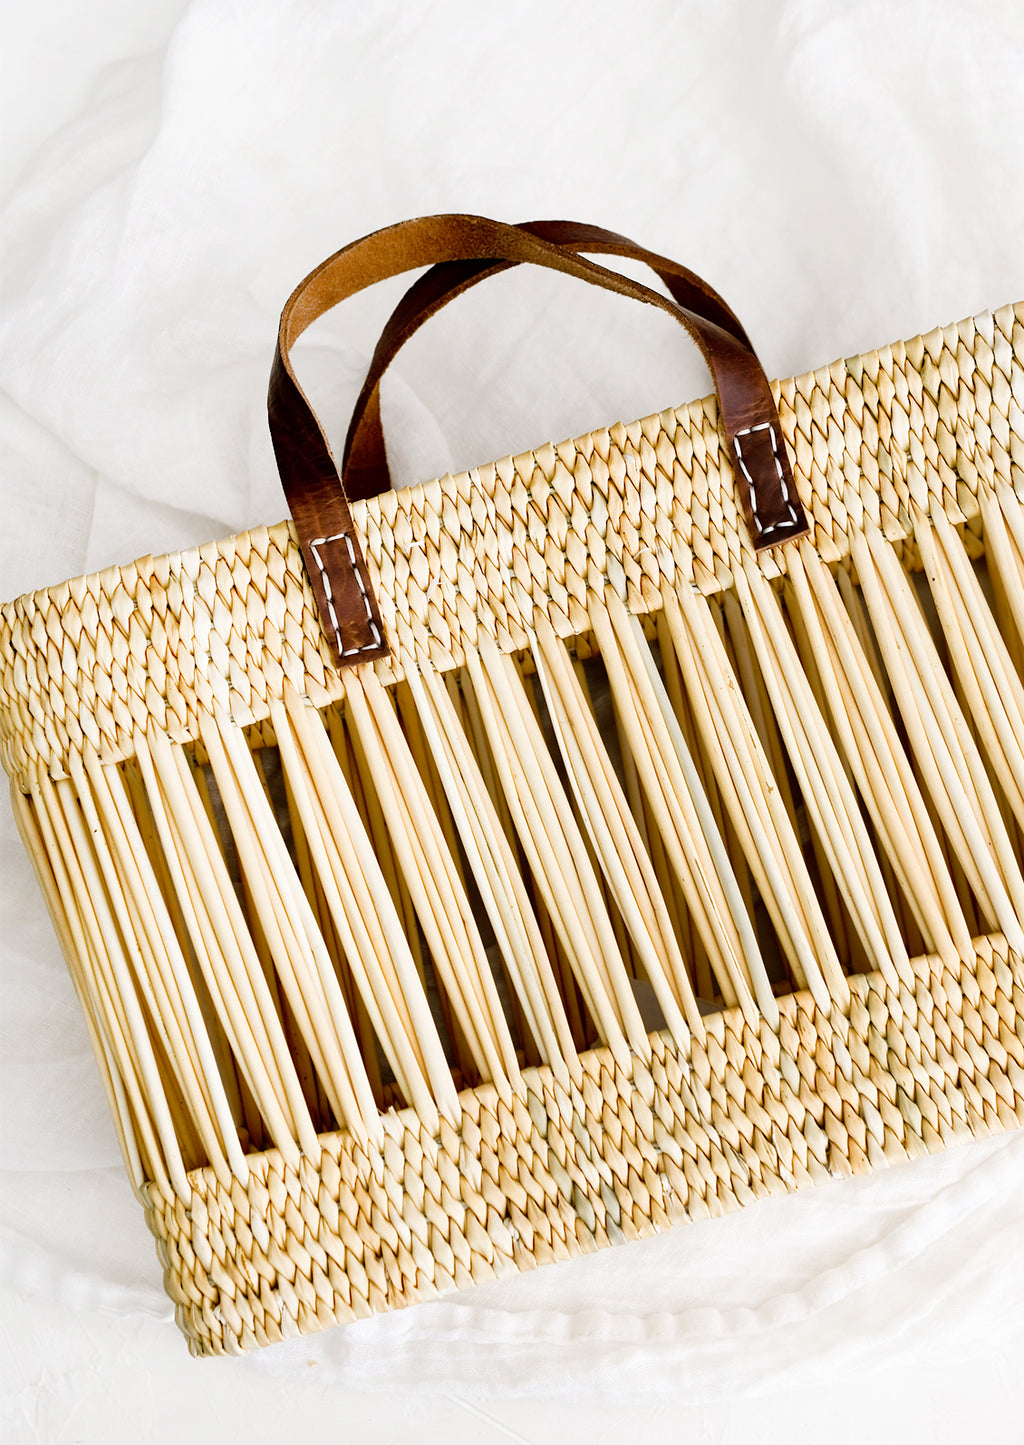 1: A tote-shaped woven reed basket with open air design, brown leather handles.